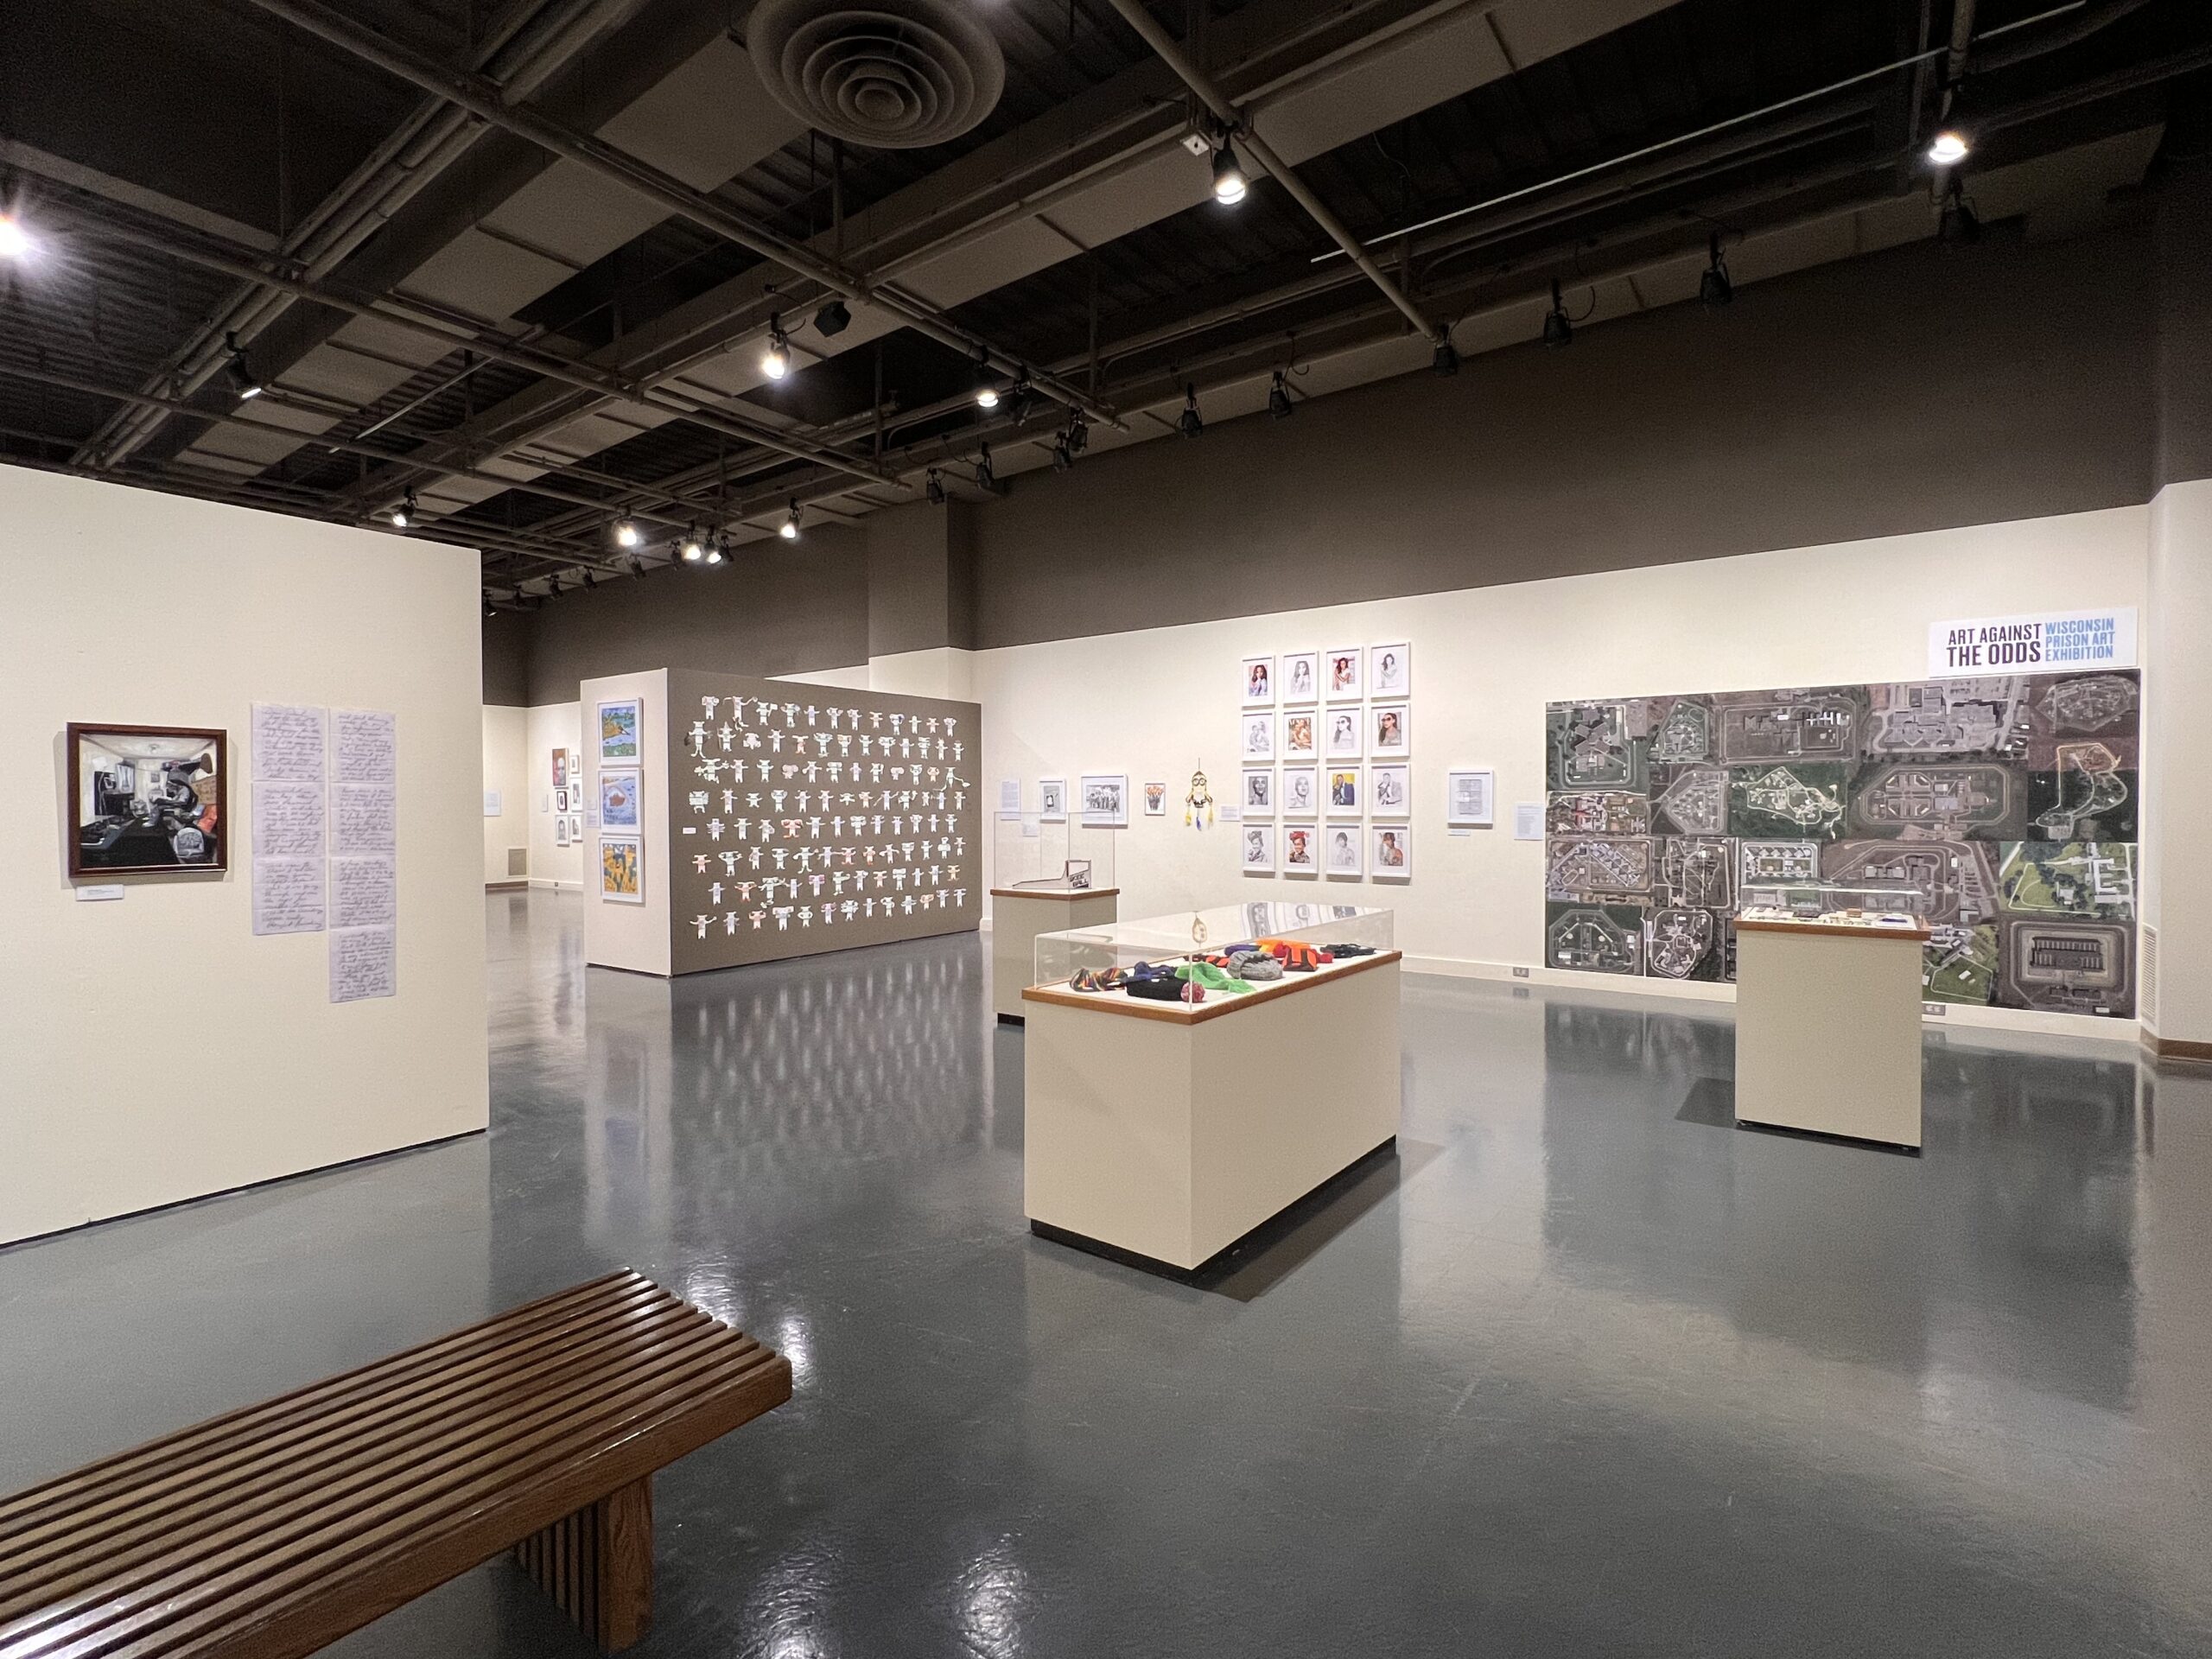 A wide view of an art exhibition with displays of objects and walls with hung artworks.